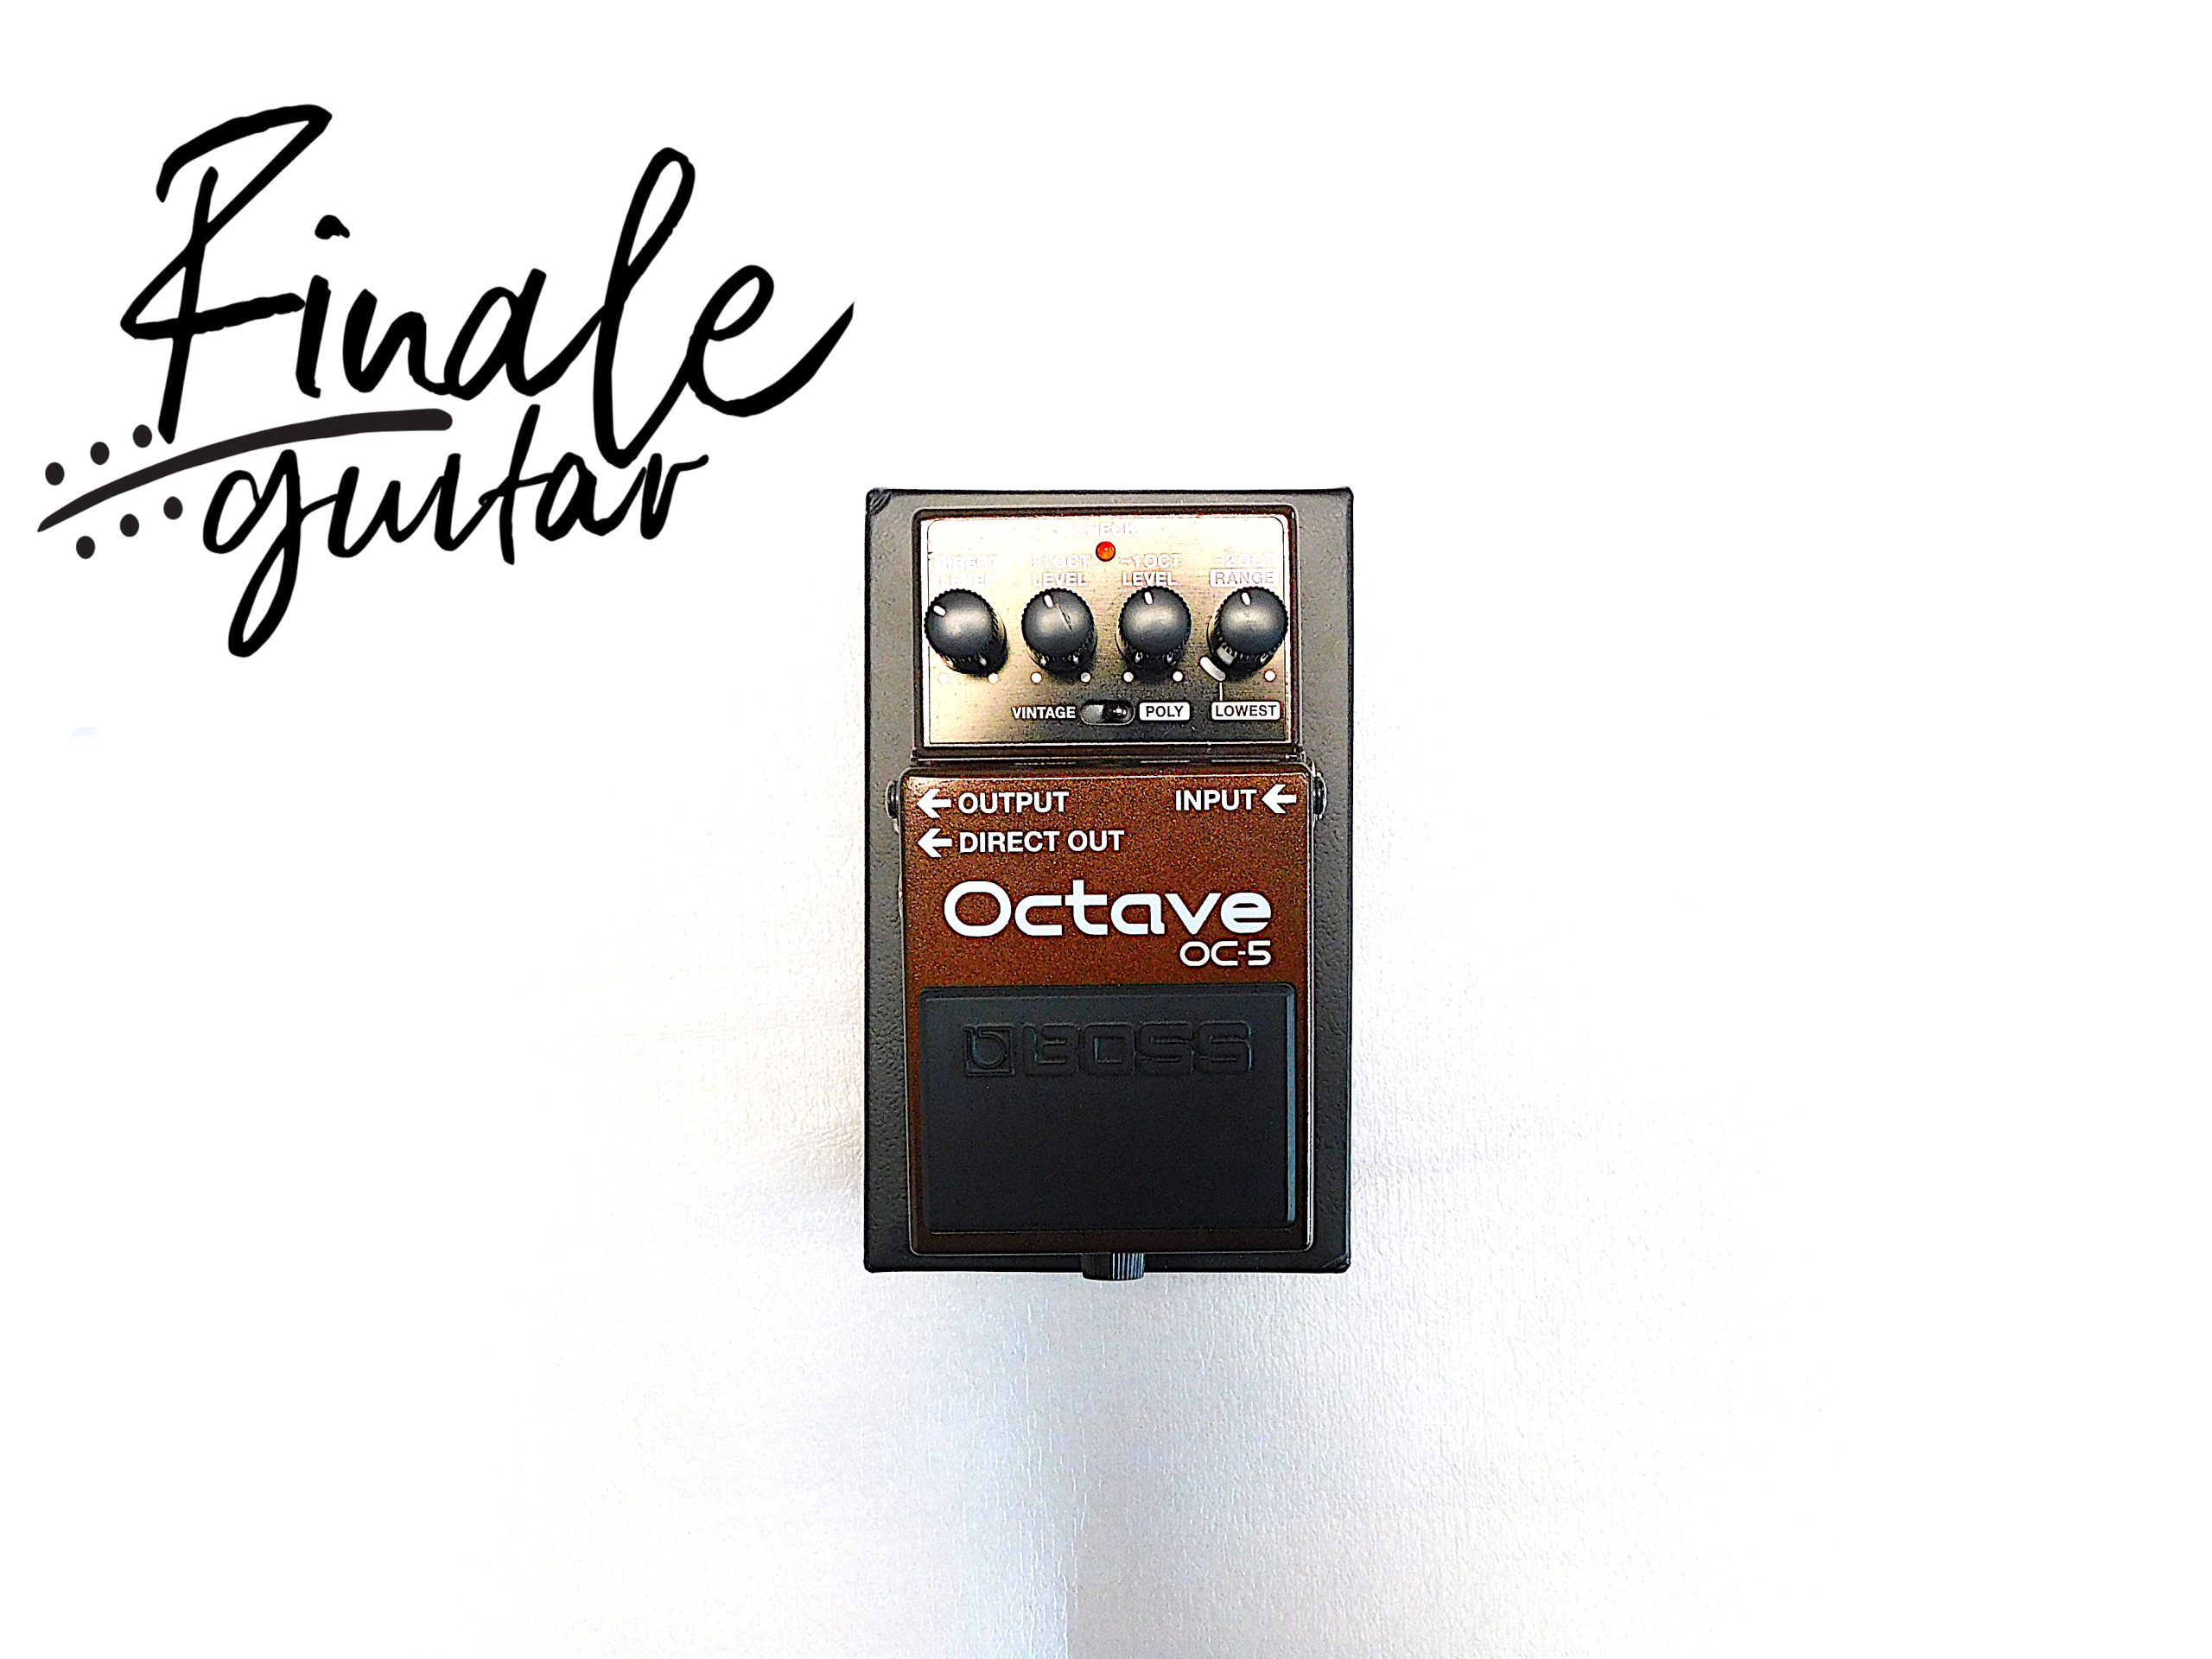 Boss OC-5 for sale in our Sheffield guitar shop, Finale Guitar